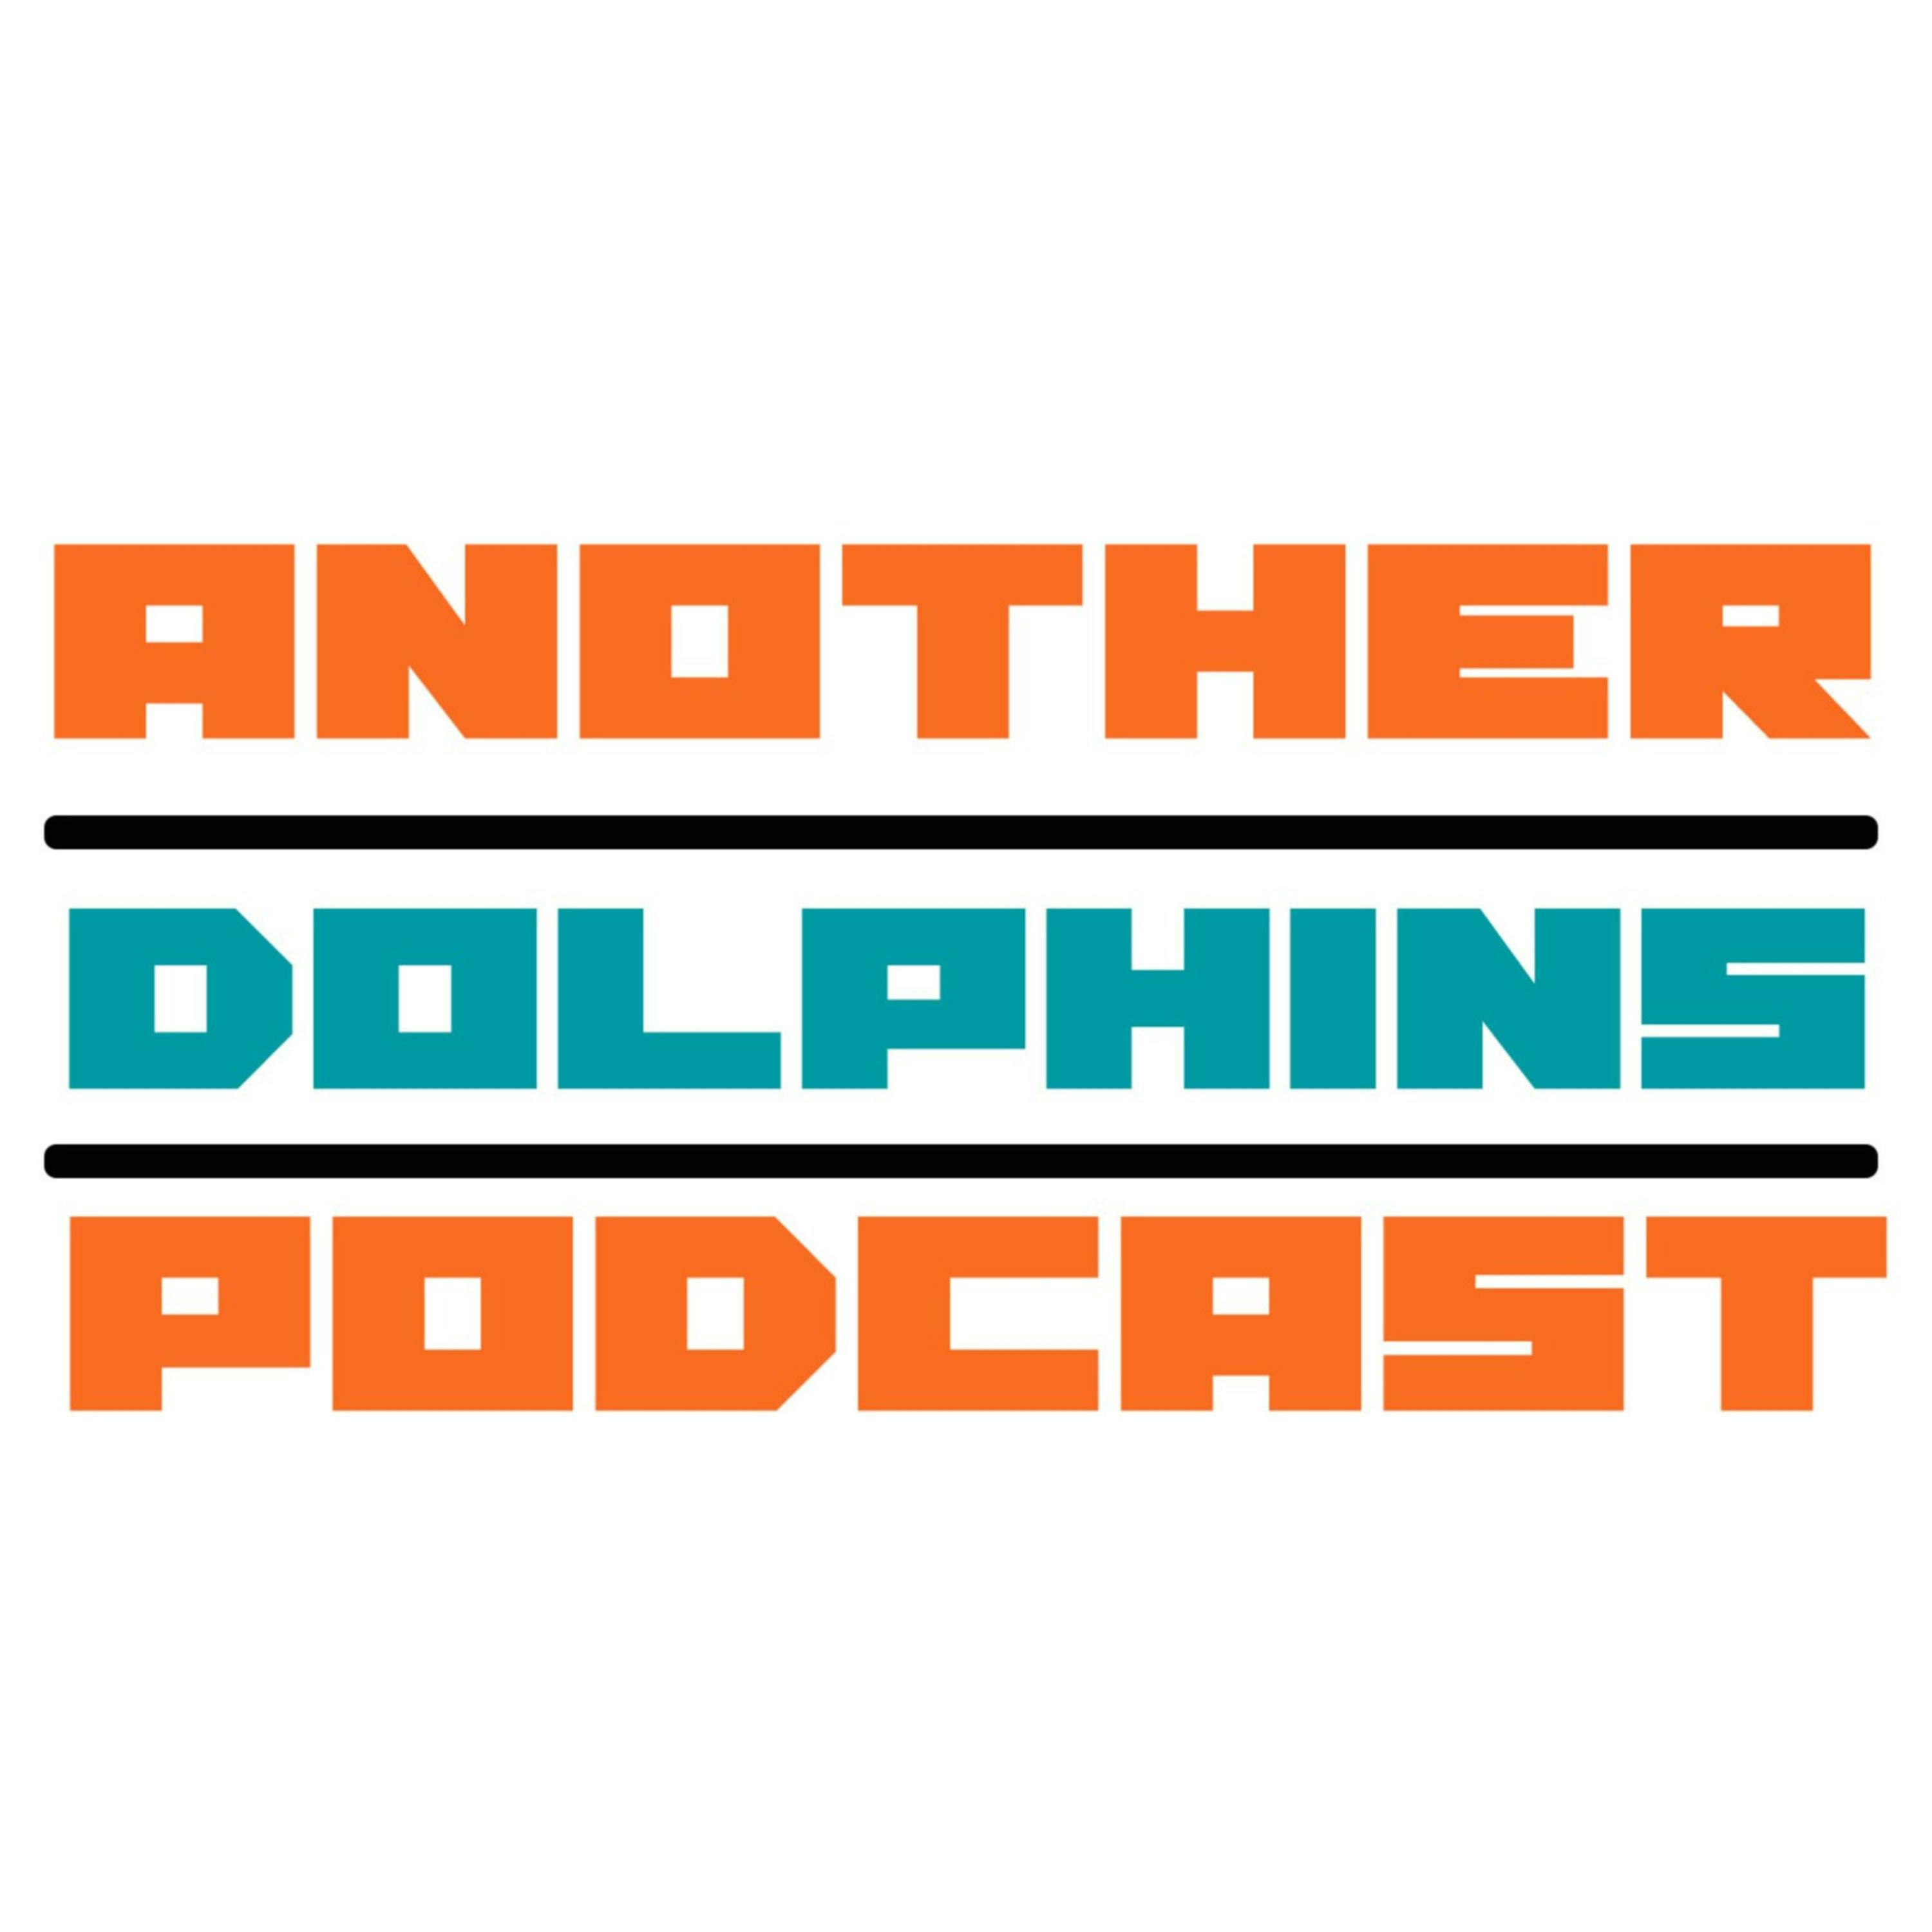 Miami Dolphins (Phinsider Radio) Instant reaction on the Dolphins signings from a wild first day of Free Agency